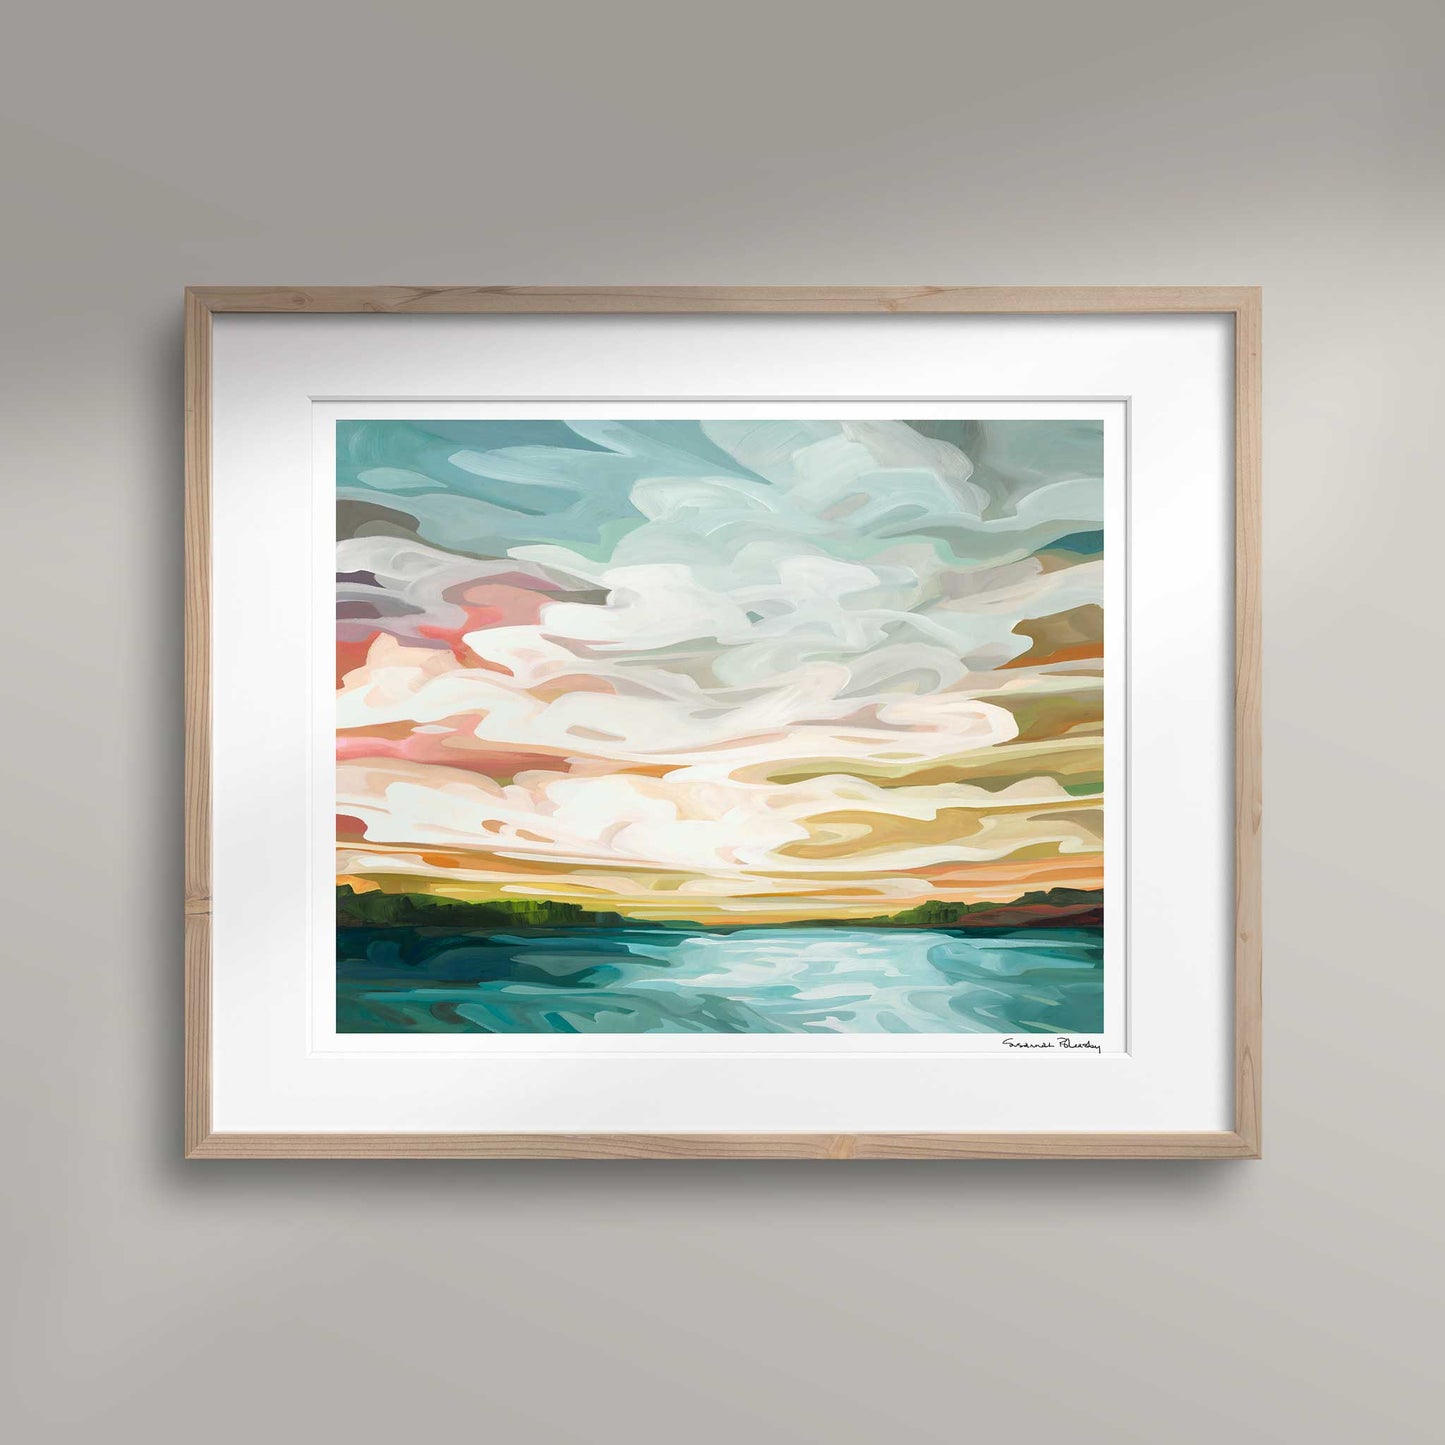 Horizontal art prints of a pastel sunrise painting by Canadian abstract artist Susannah Bleasby